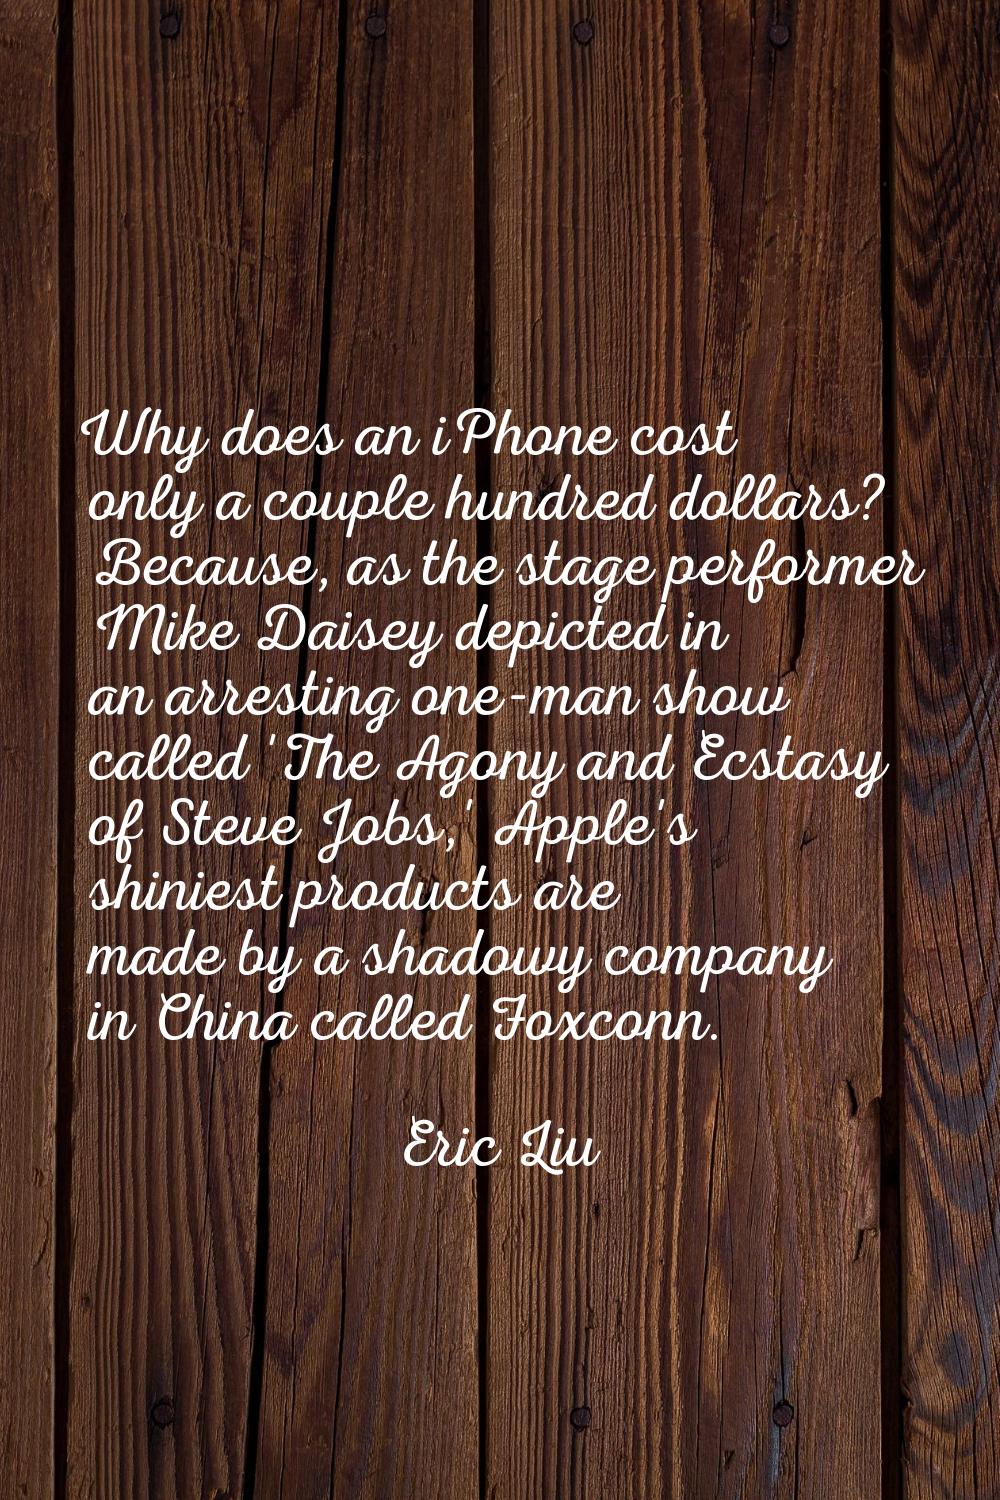 Why does an iPhone cost only a couple hundred dollars? Because, as the stage performer Mike Daisey 